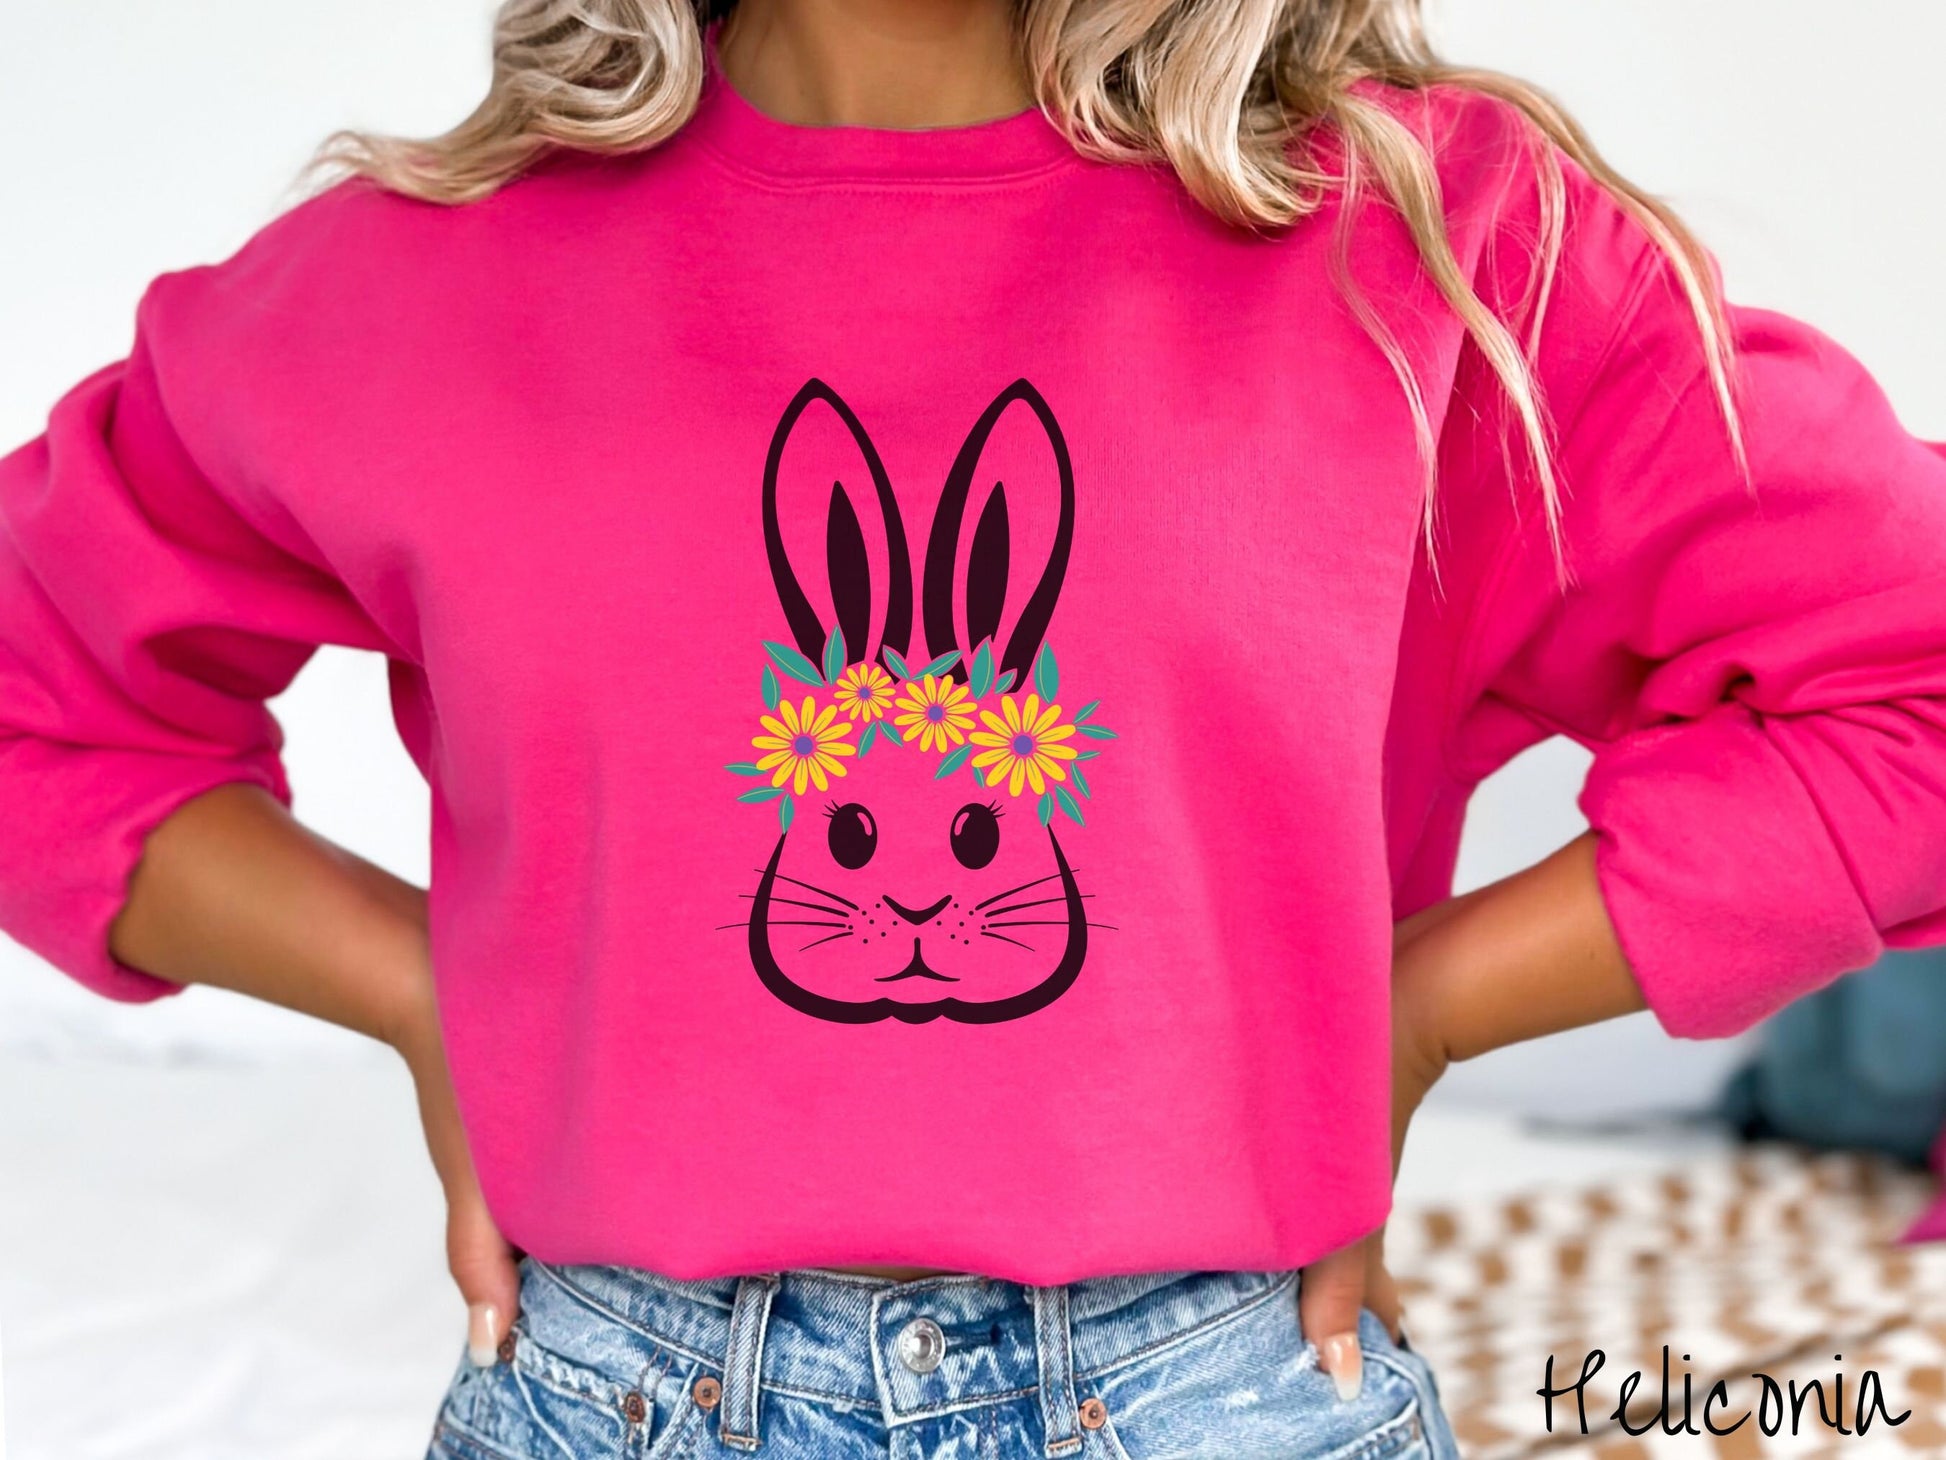 A woman wearing a cute, vintage heliconia colored sweatshirt with a black outline of a bunny rabbit with eyelashes and whiskers that has a yellow and purple flower headband resting below its large ears.